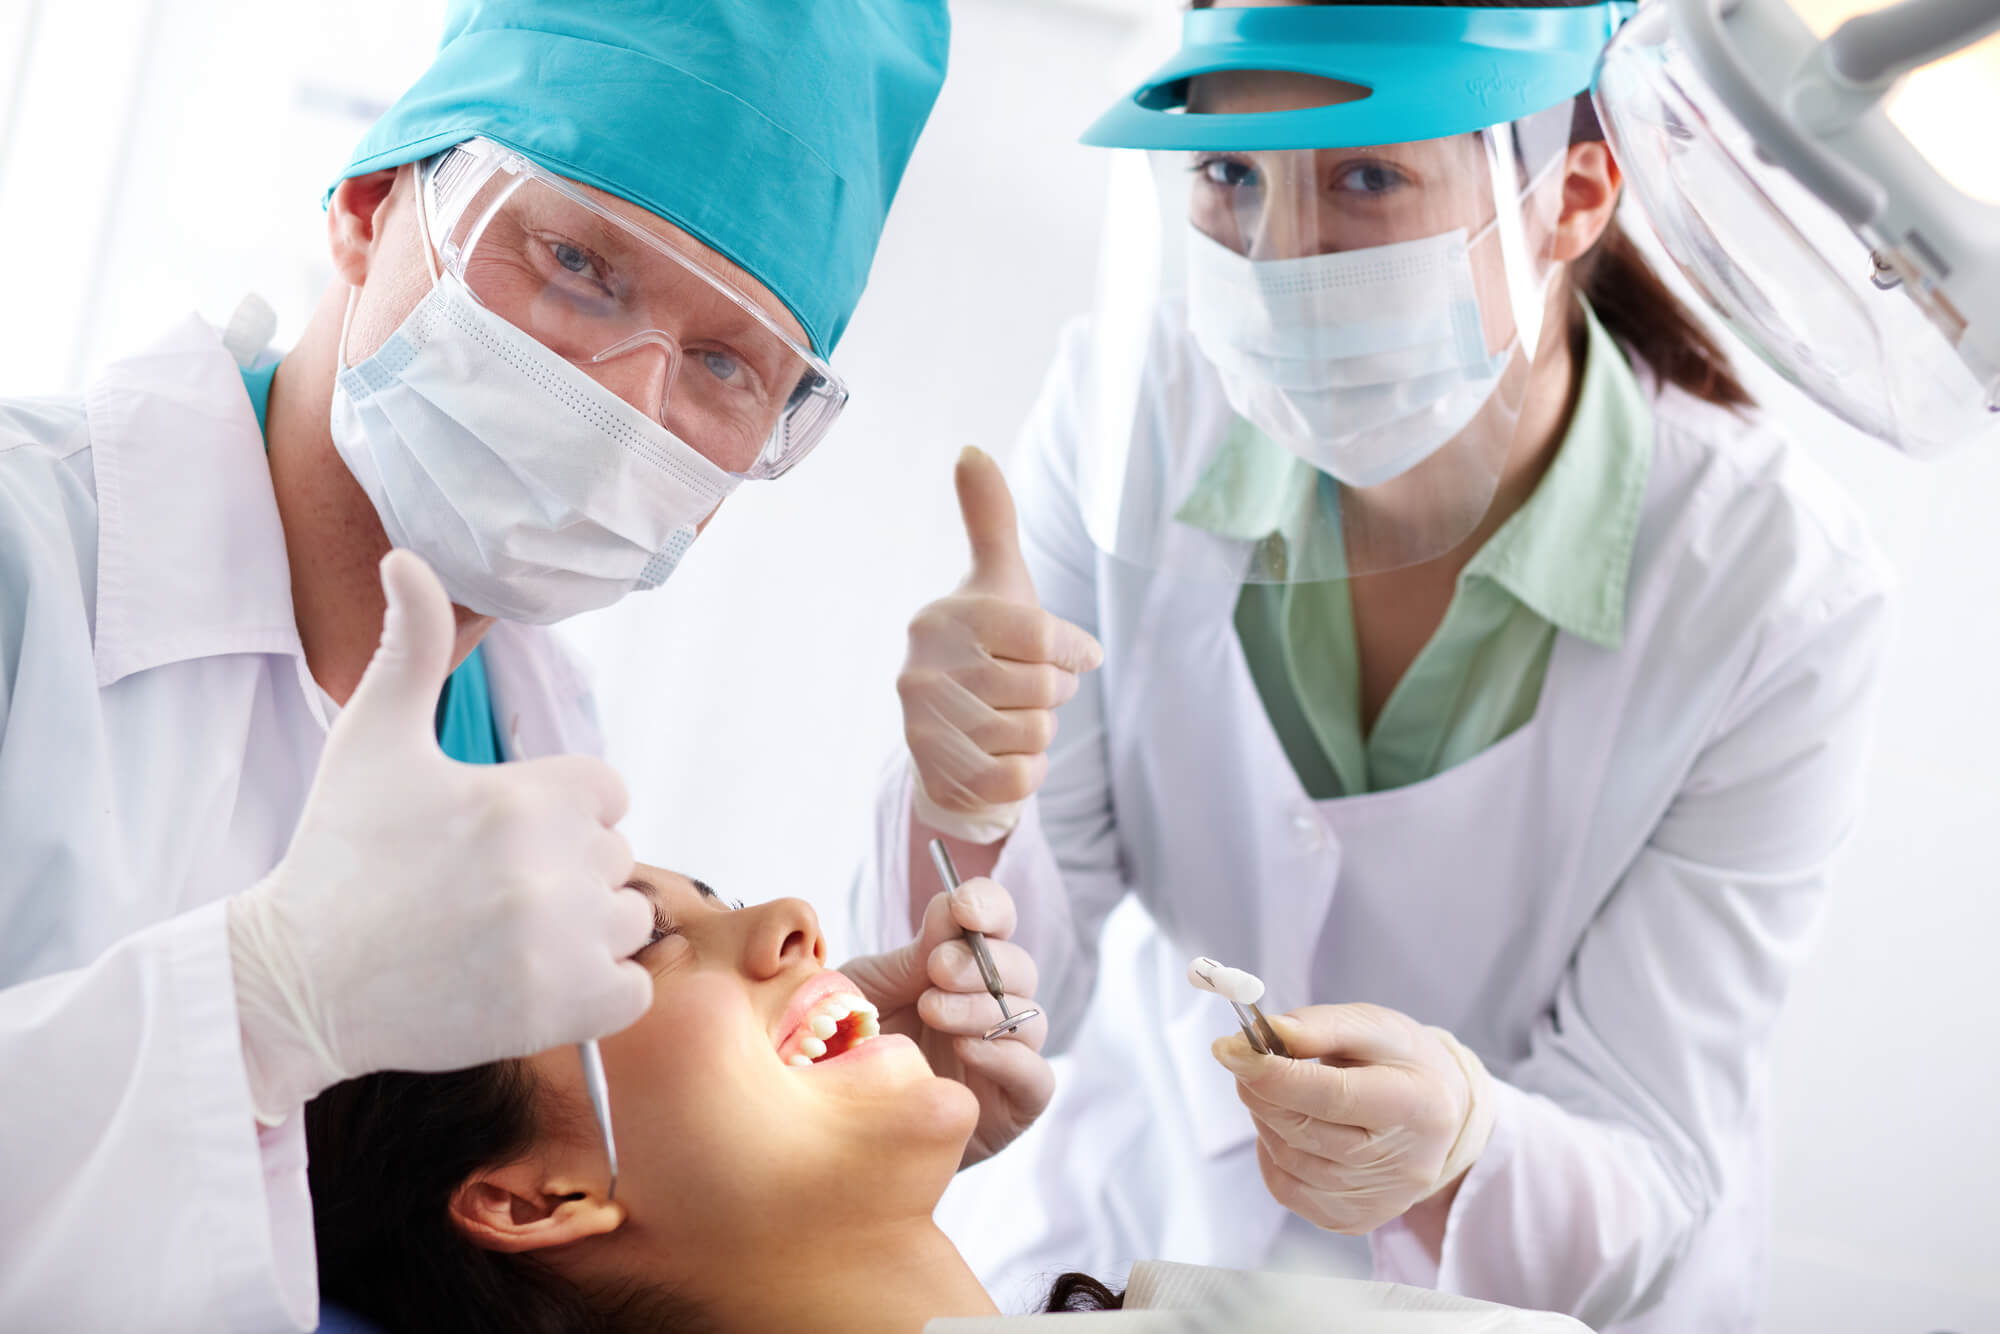 where is the best root canal therapy richmond?